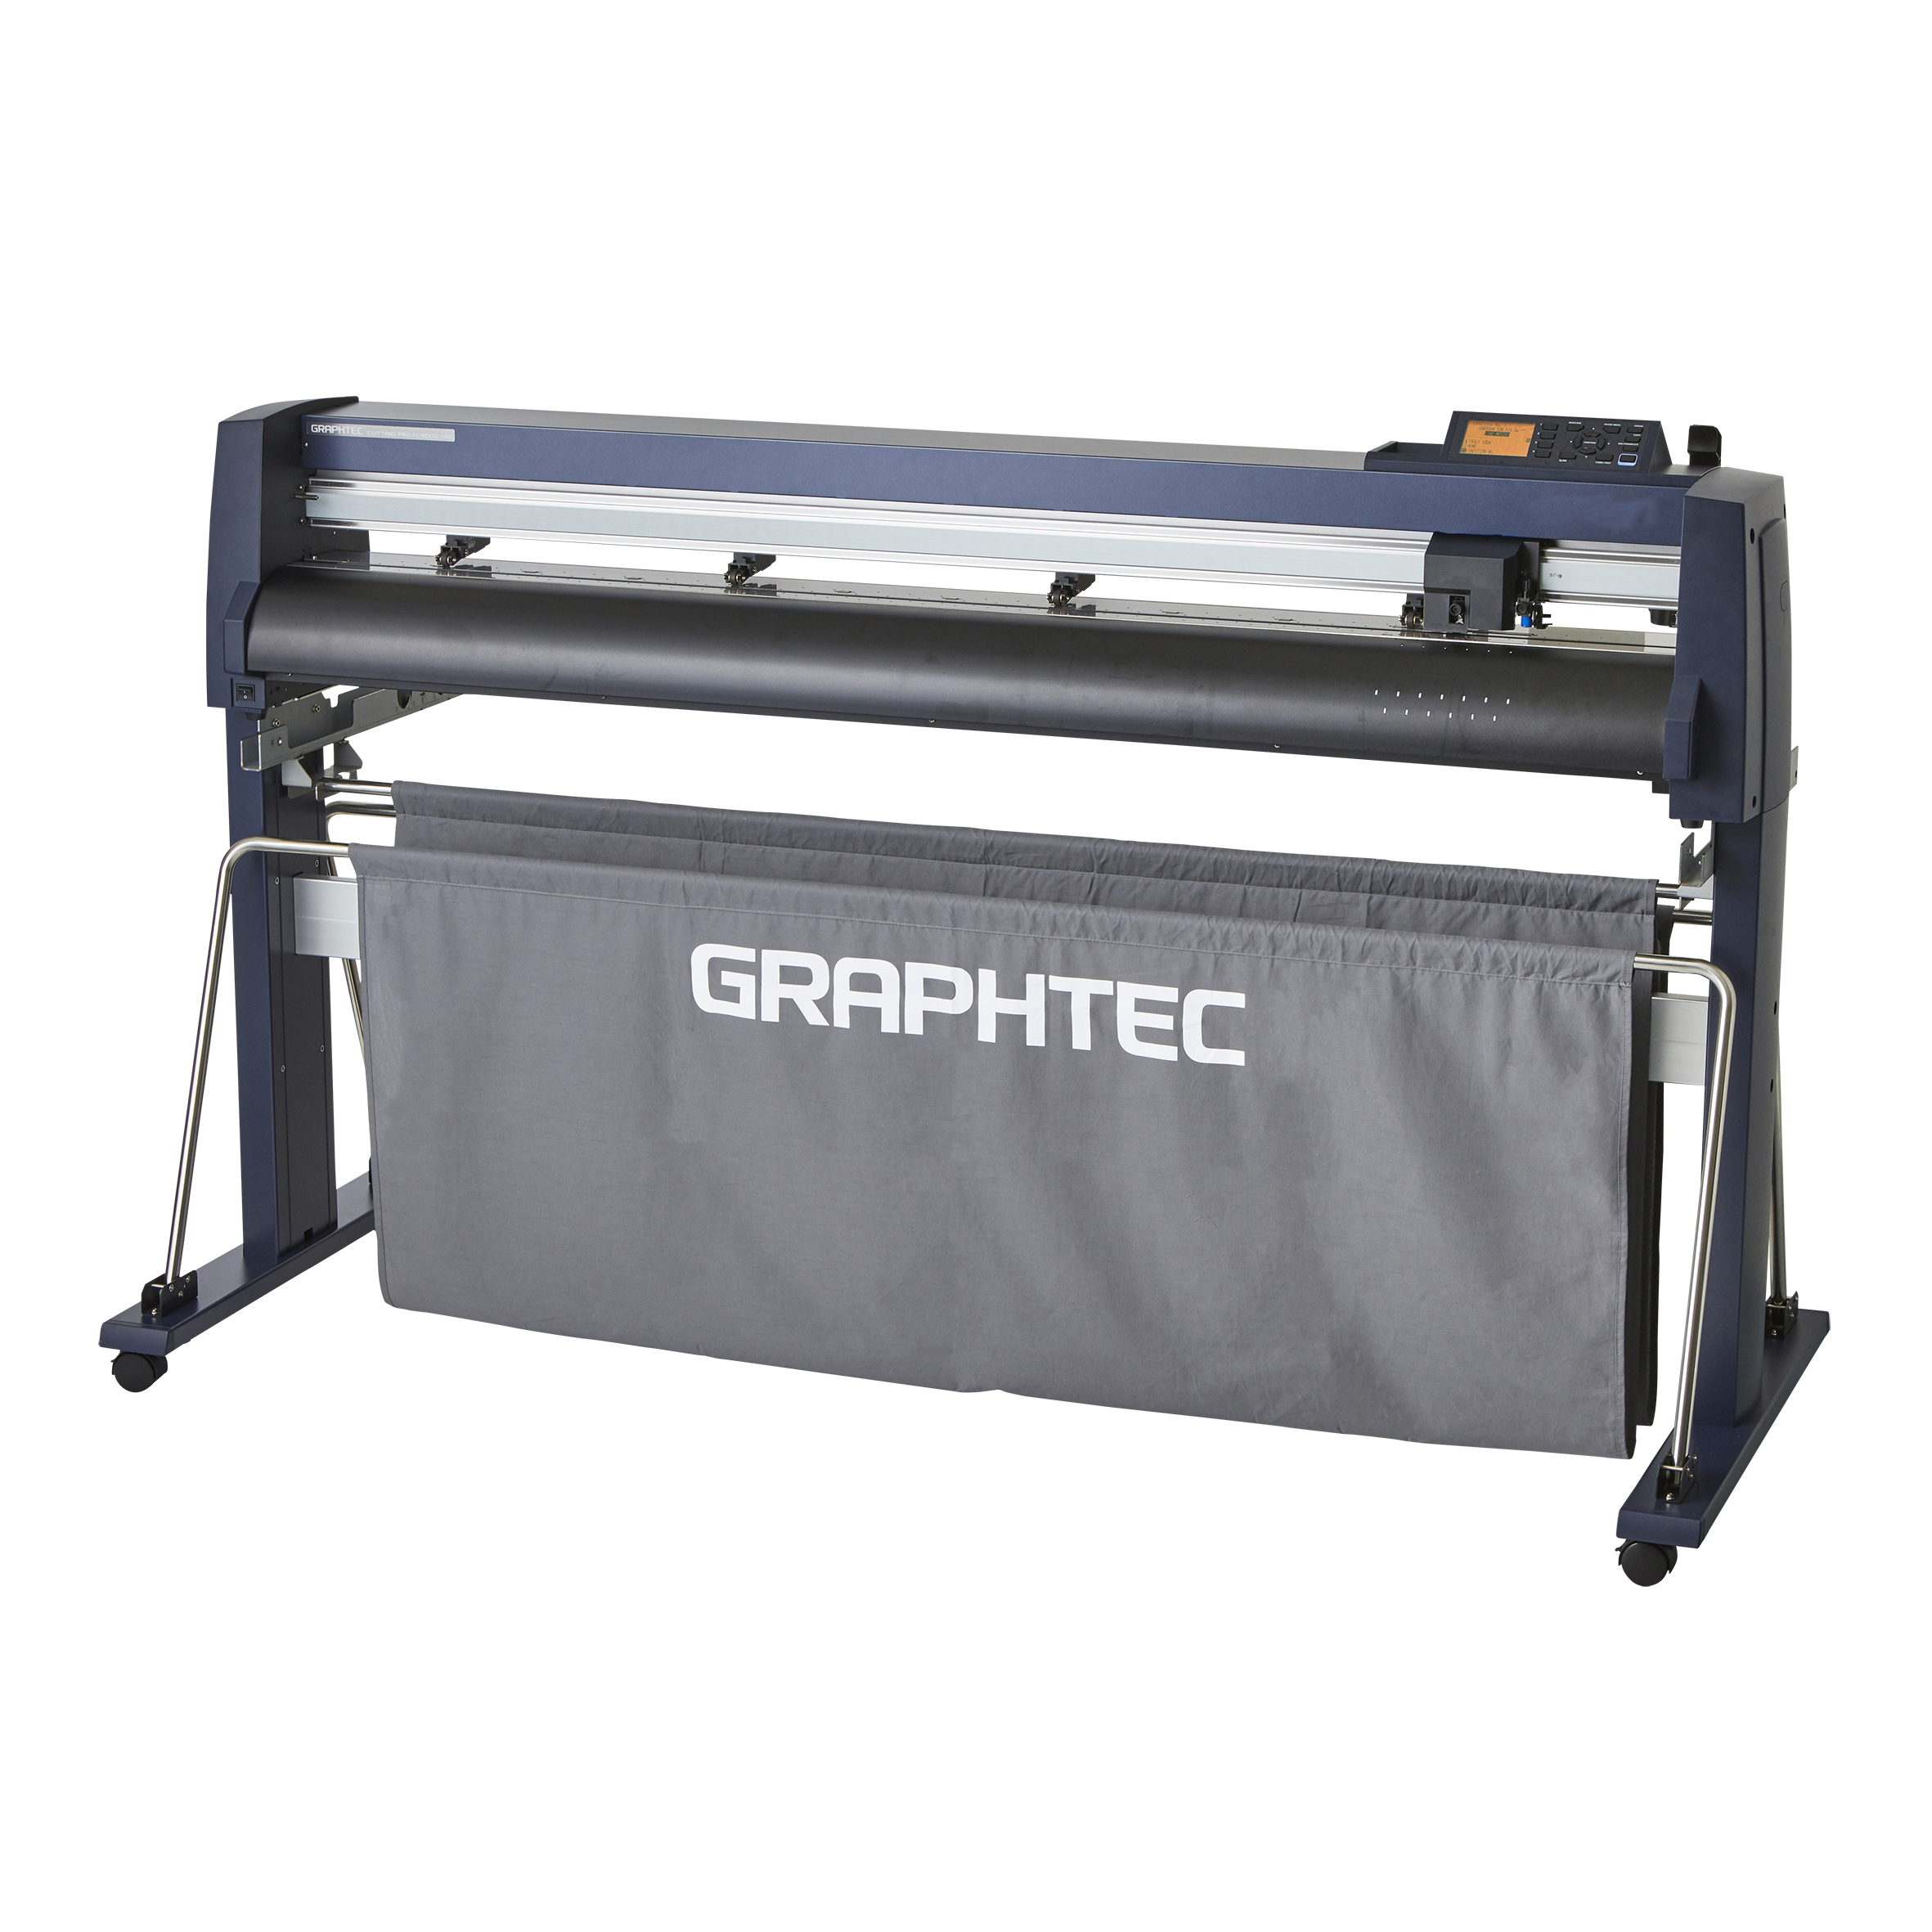 Shop Graphtec FC9000 54" Cutting Plotter- CALL FOR PRICING